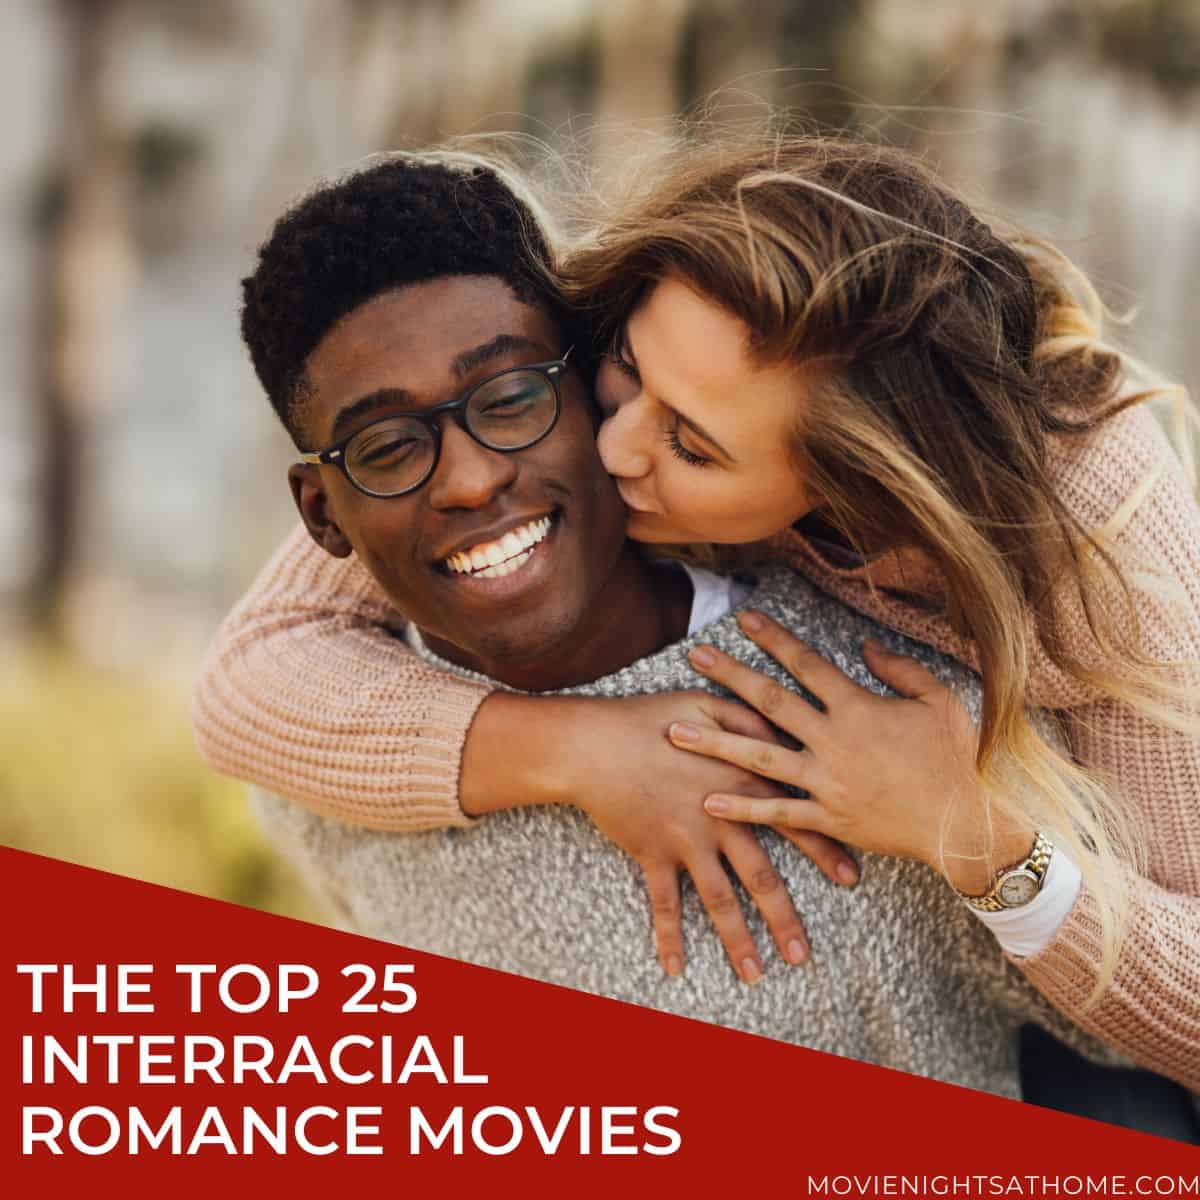 antoinette dekker recommends wifes interracial movies pic